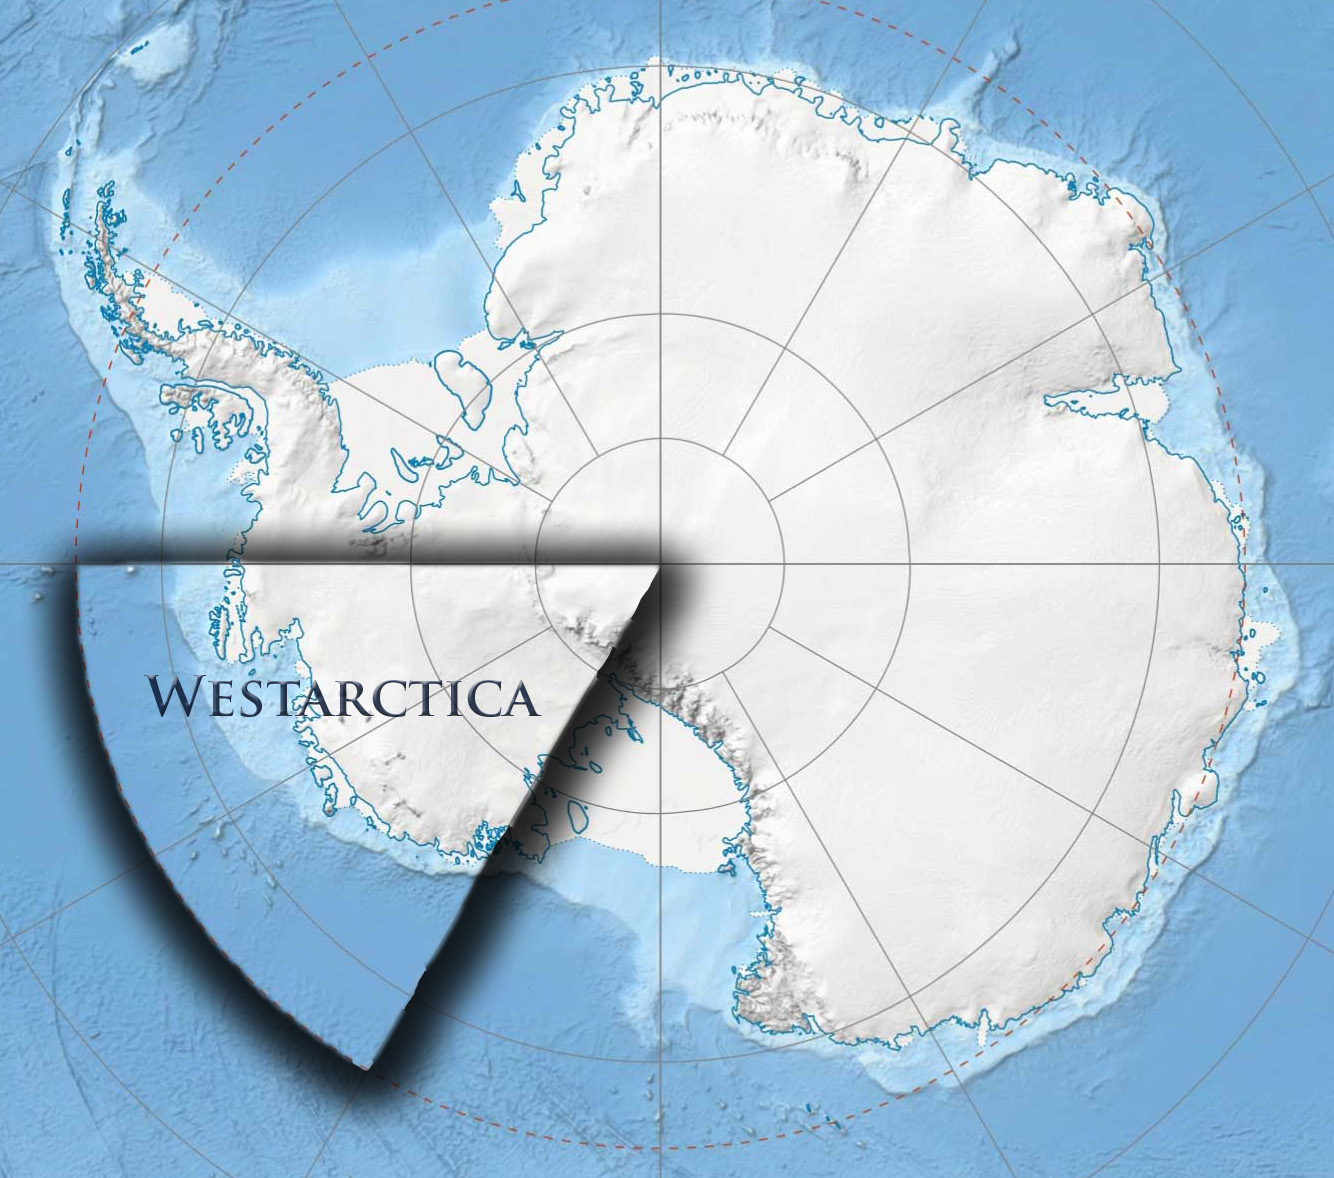 A map of antarctica with the word west antarctica.